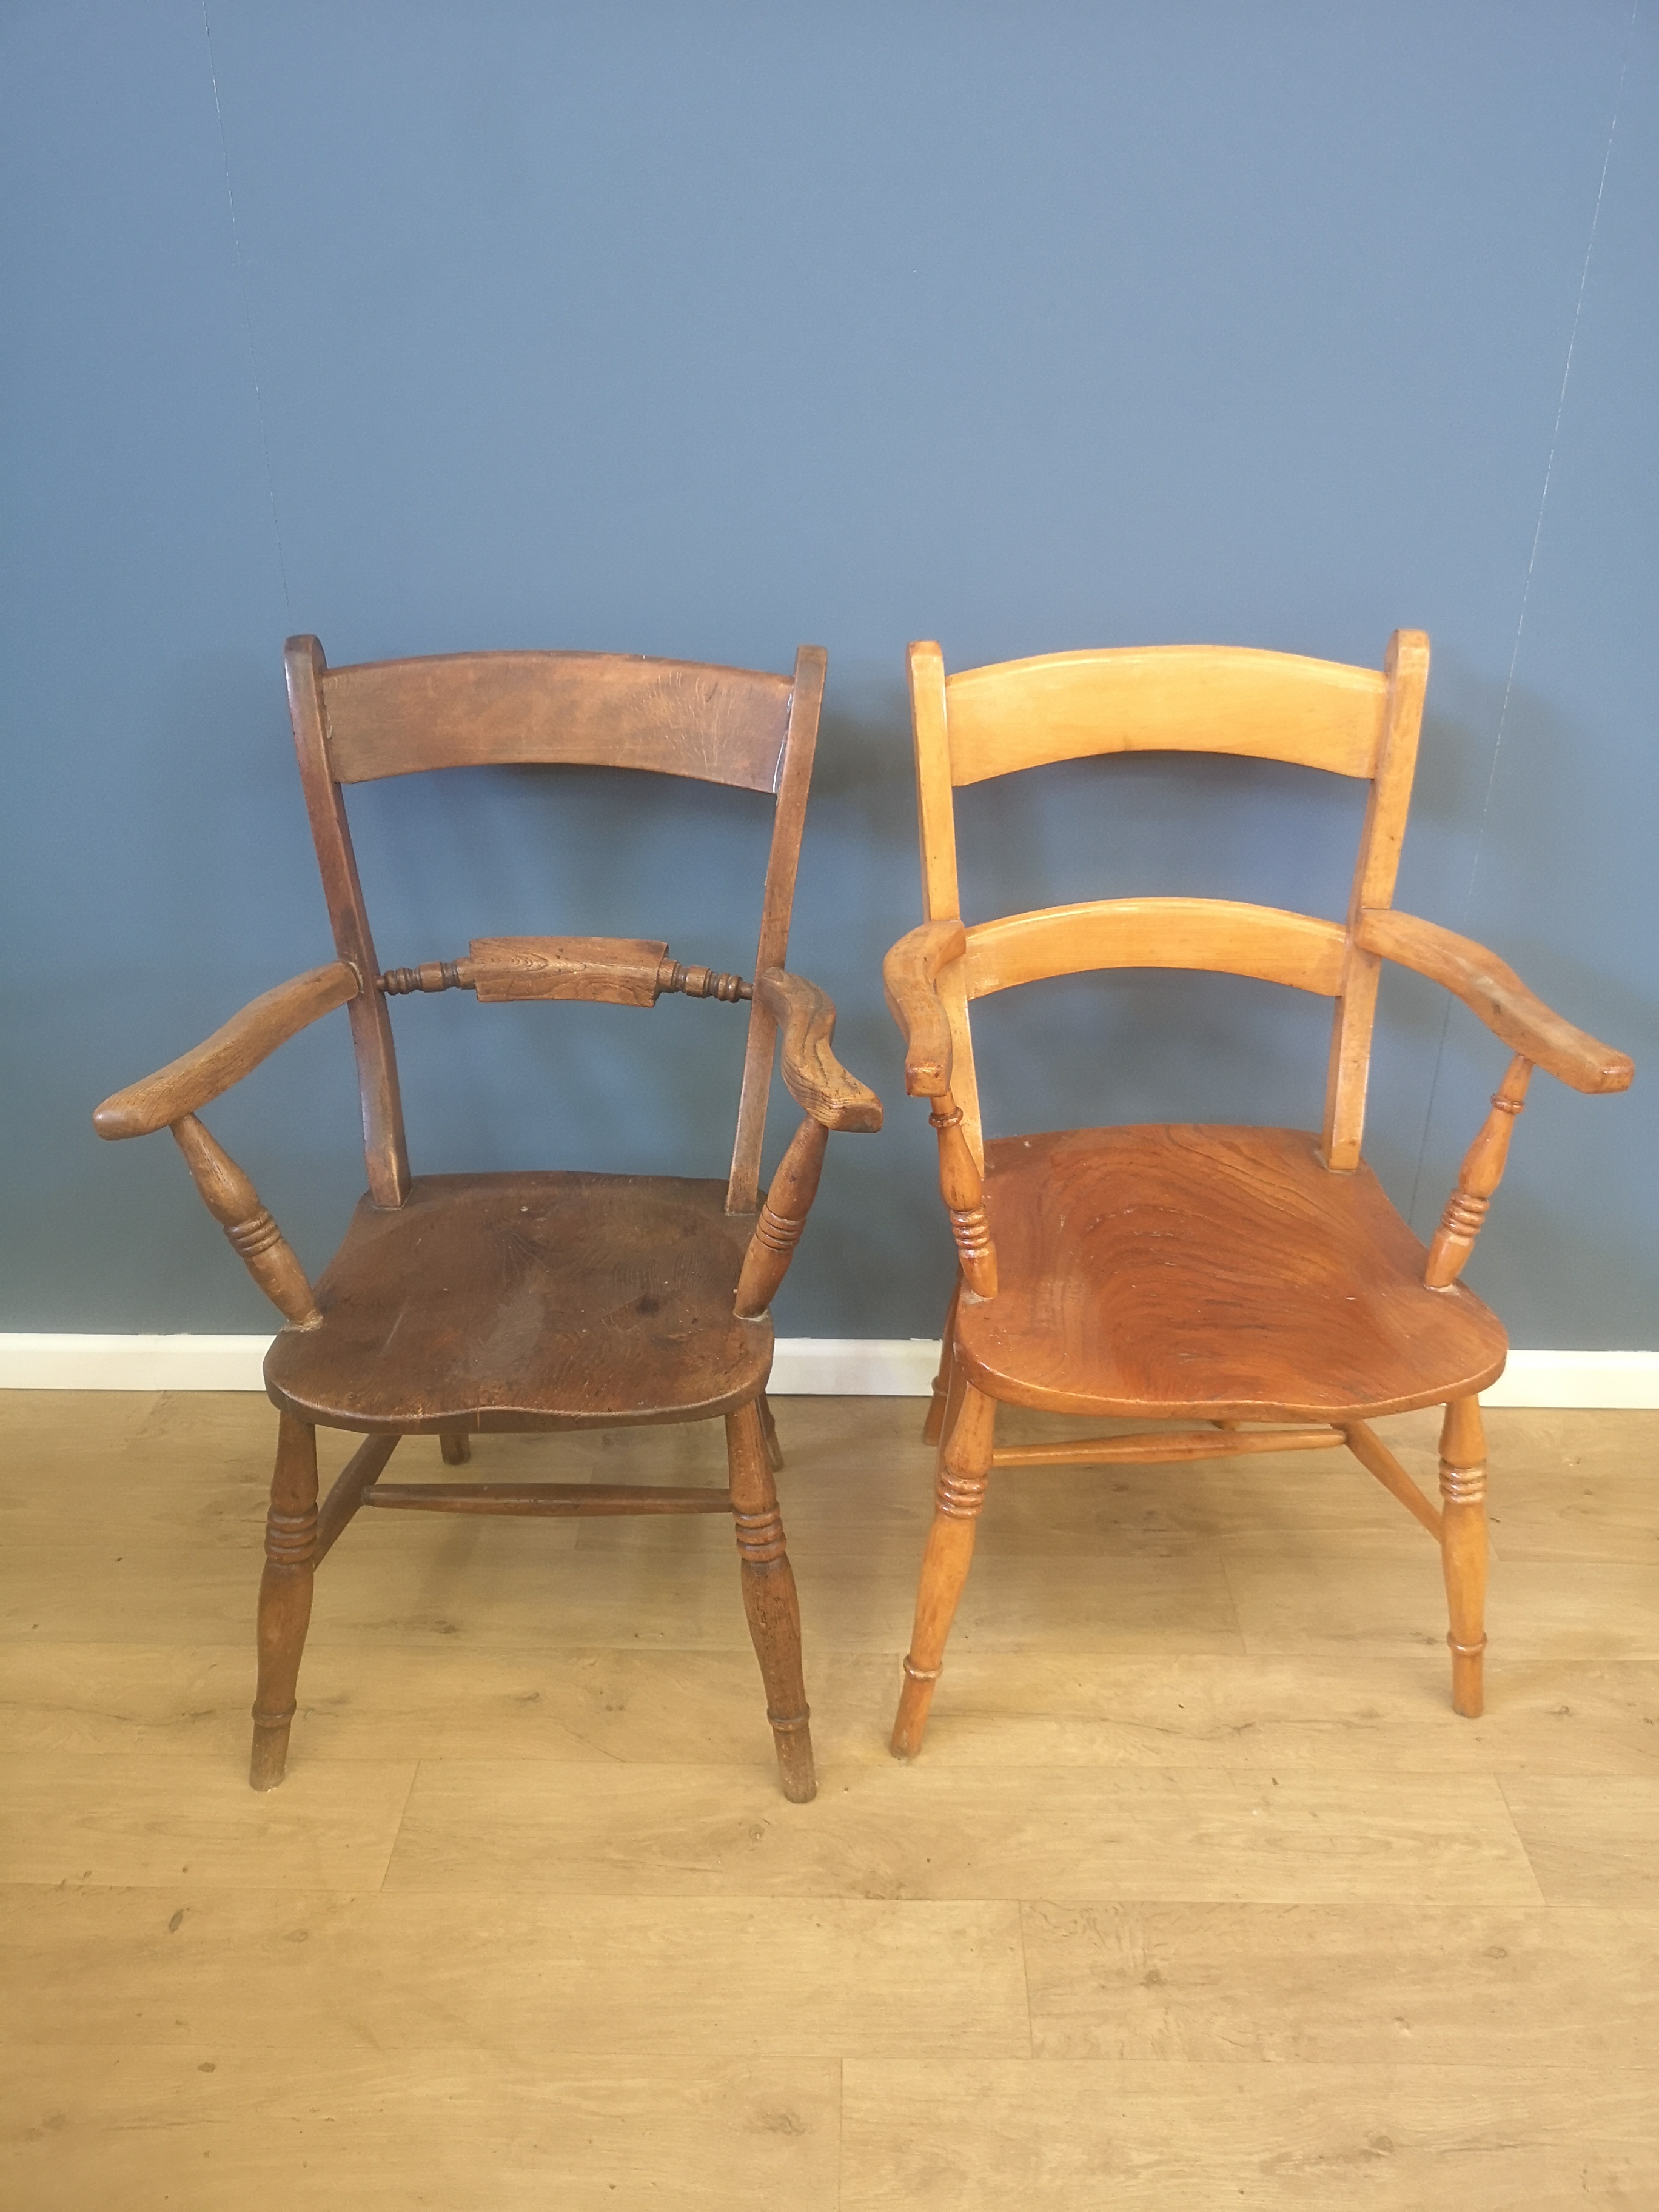 Two open armchairs with elm seats